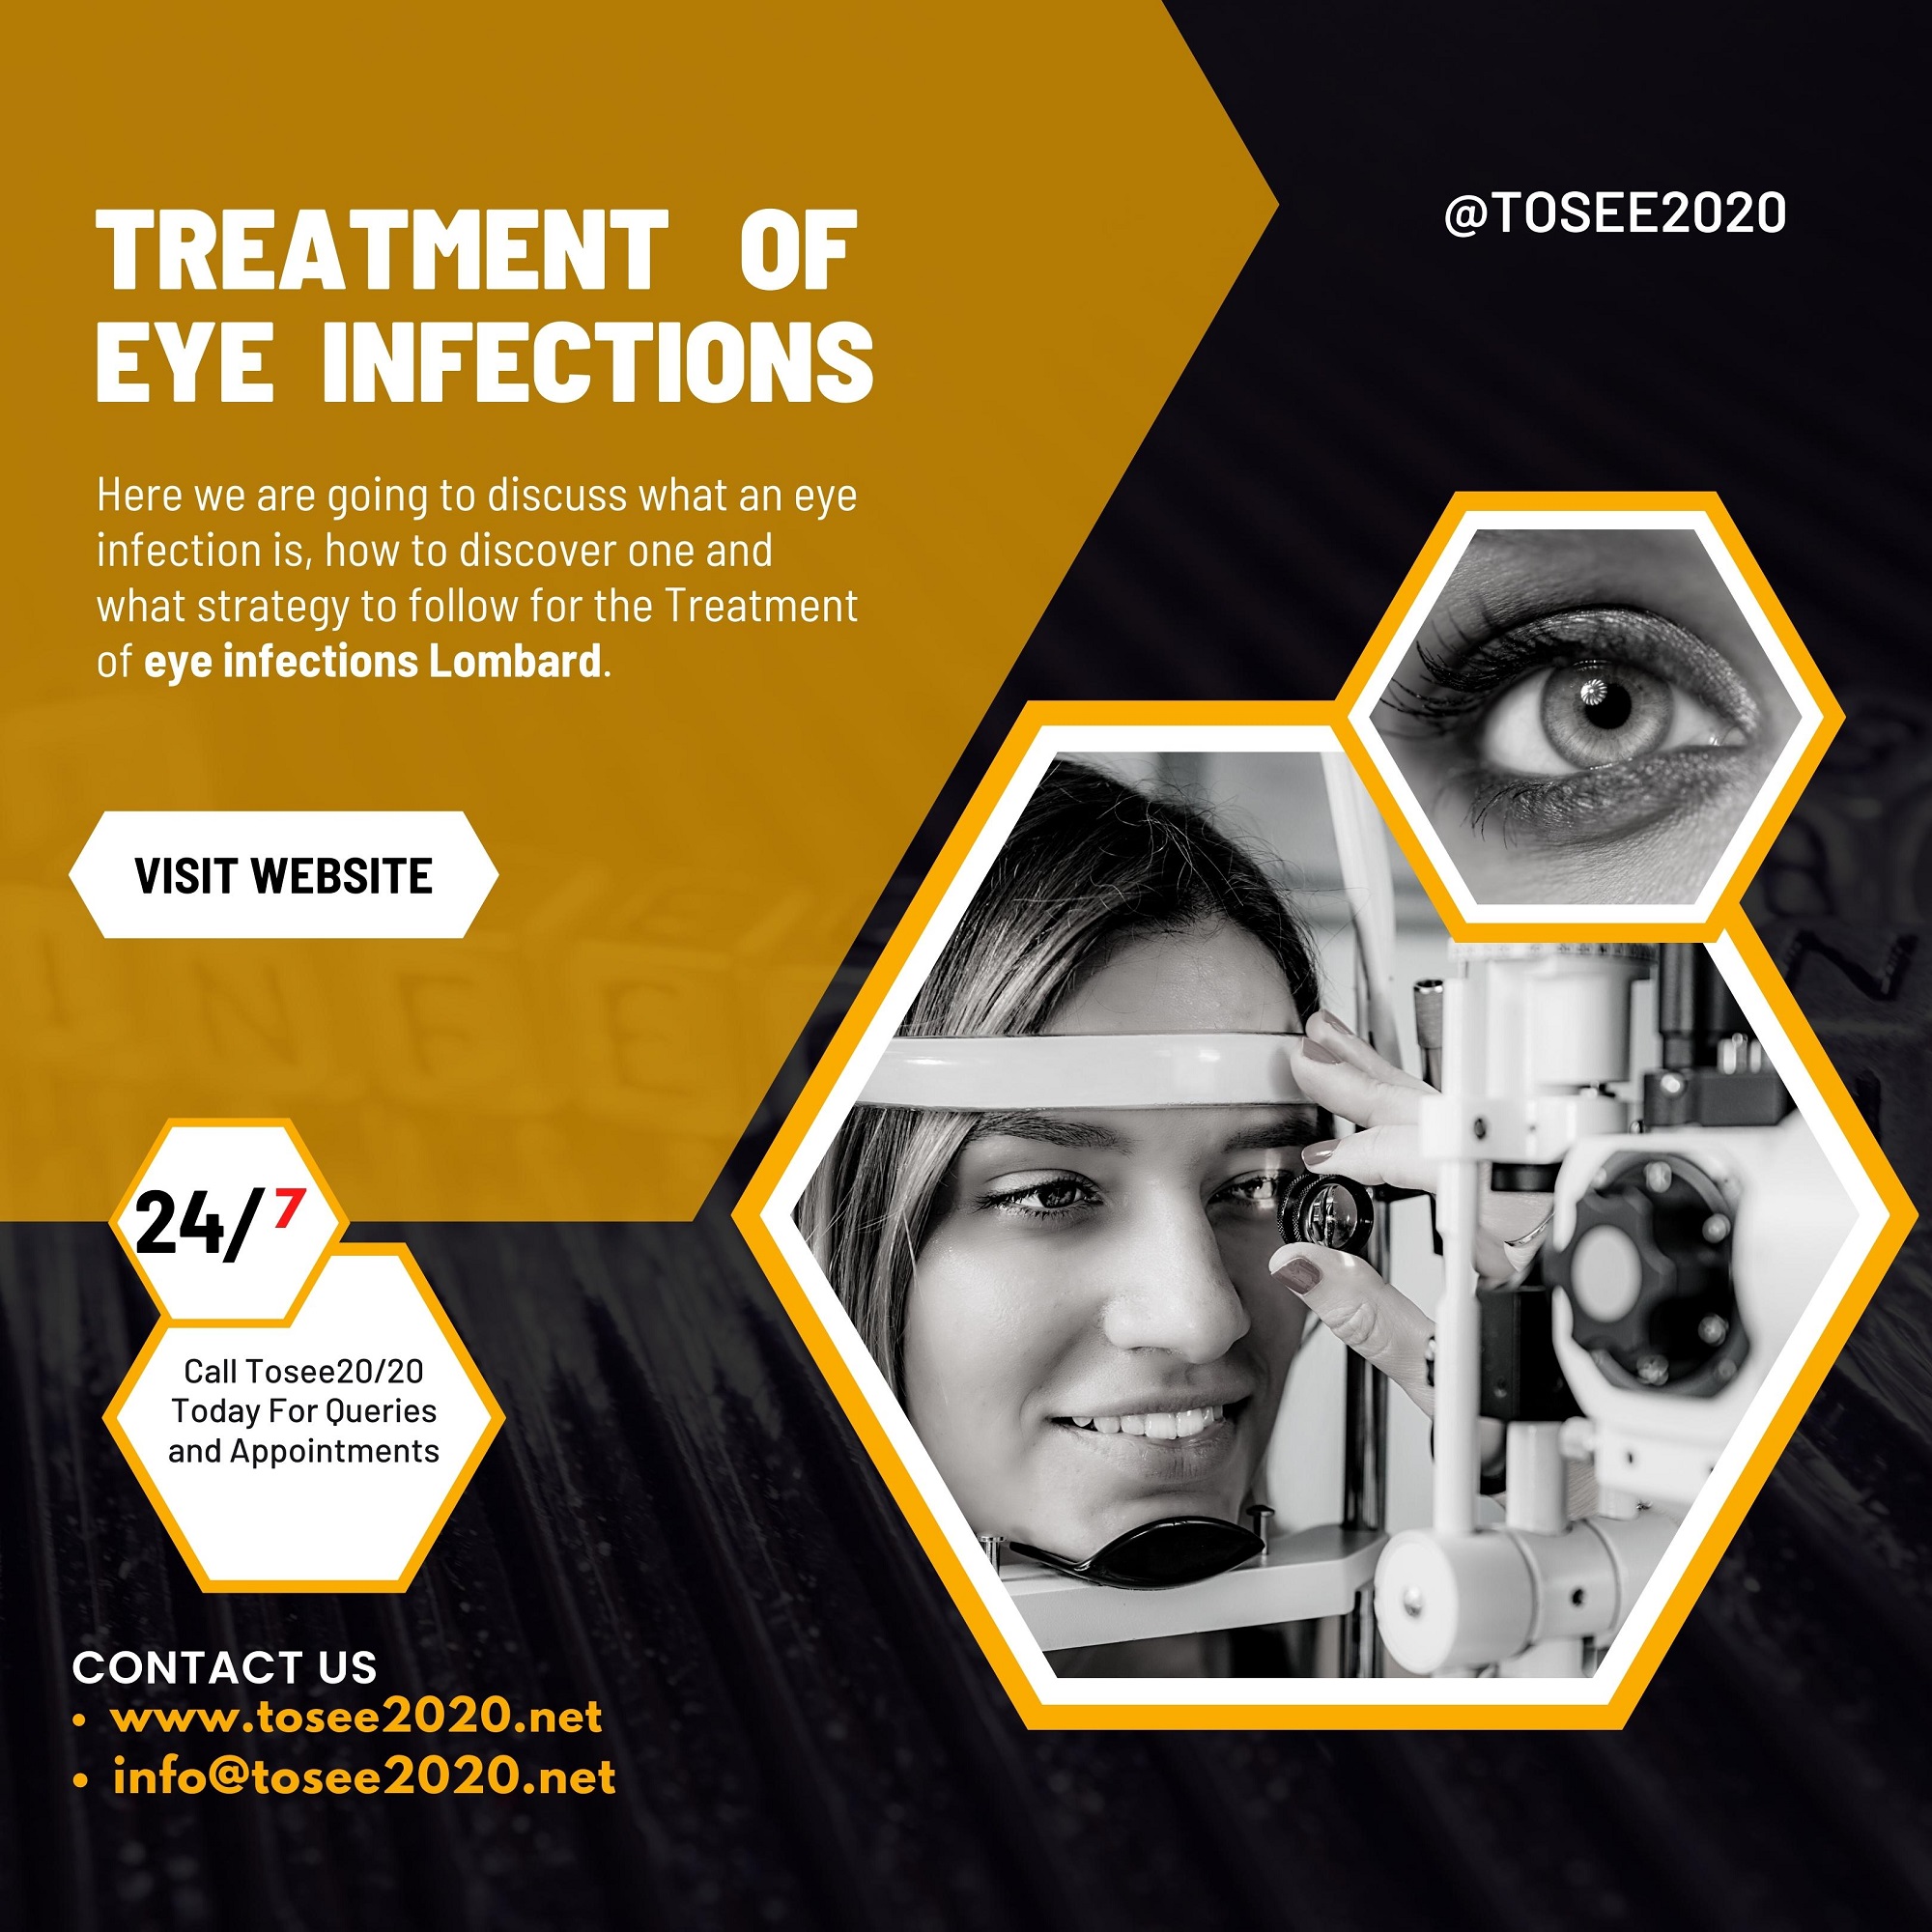 Treatment Of Eye Infections Lombard